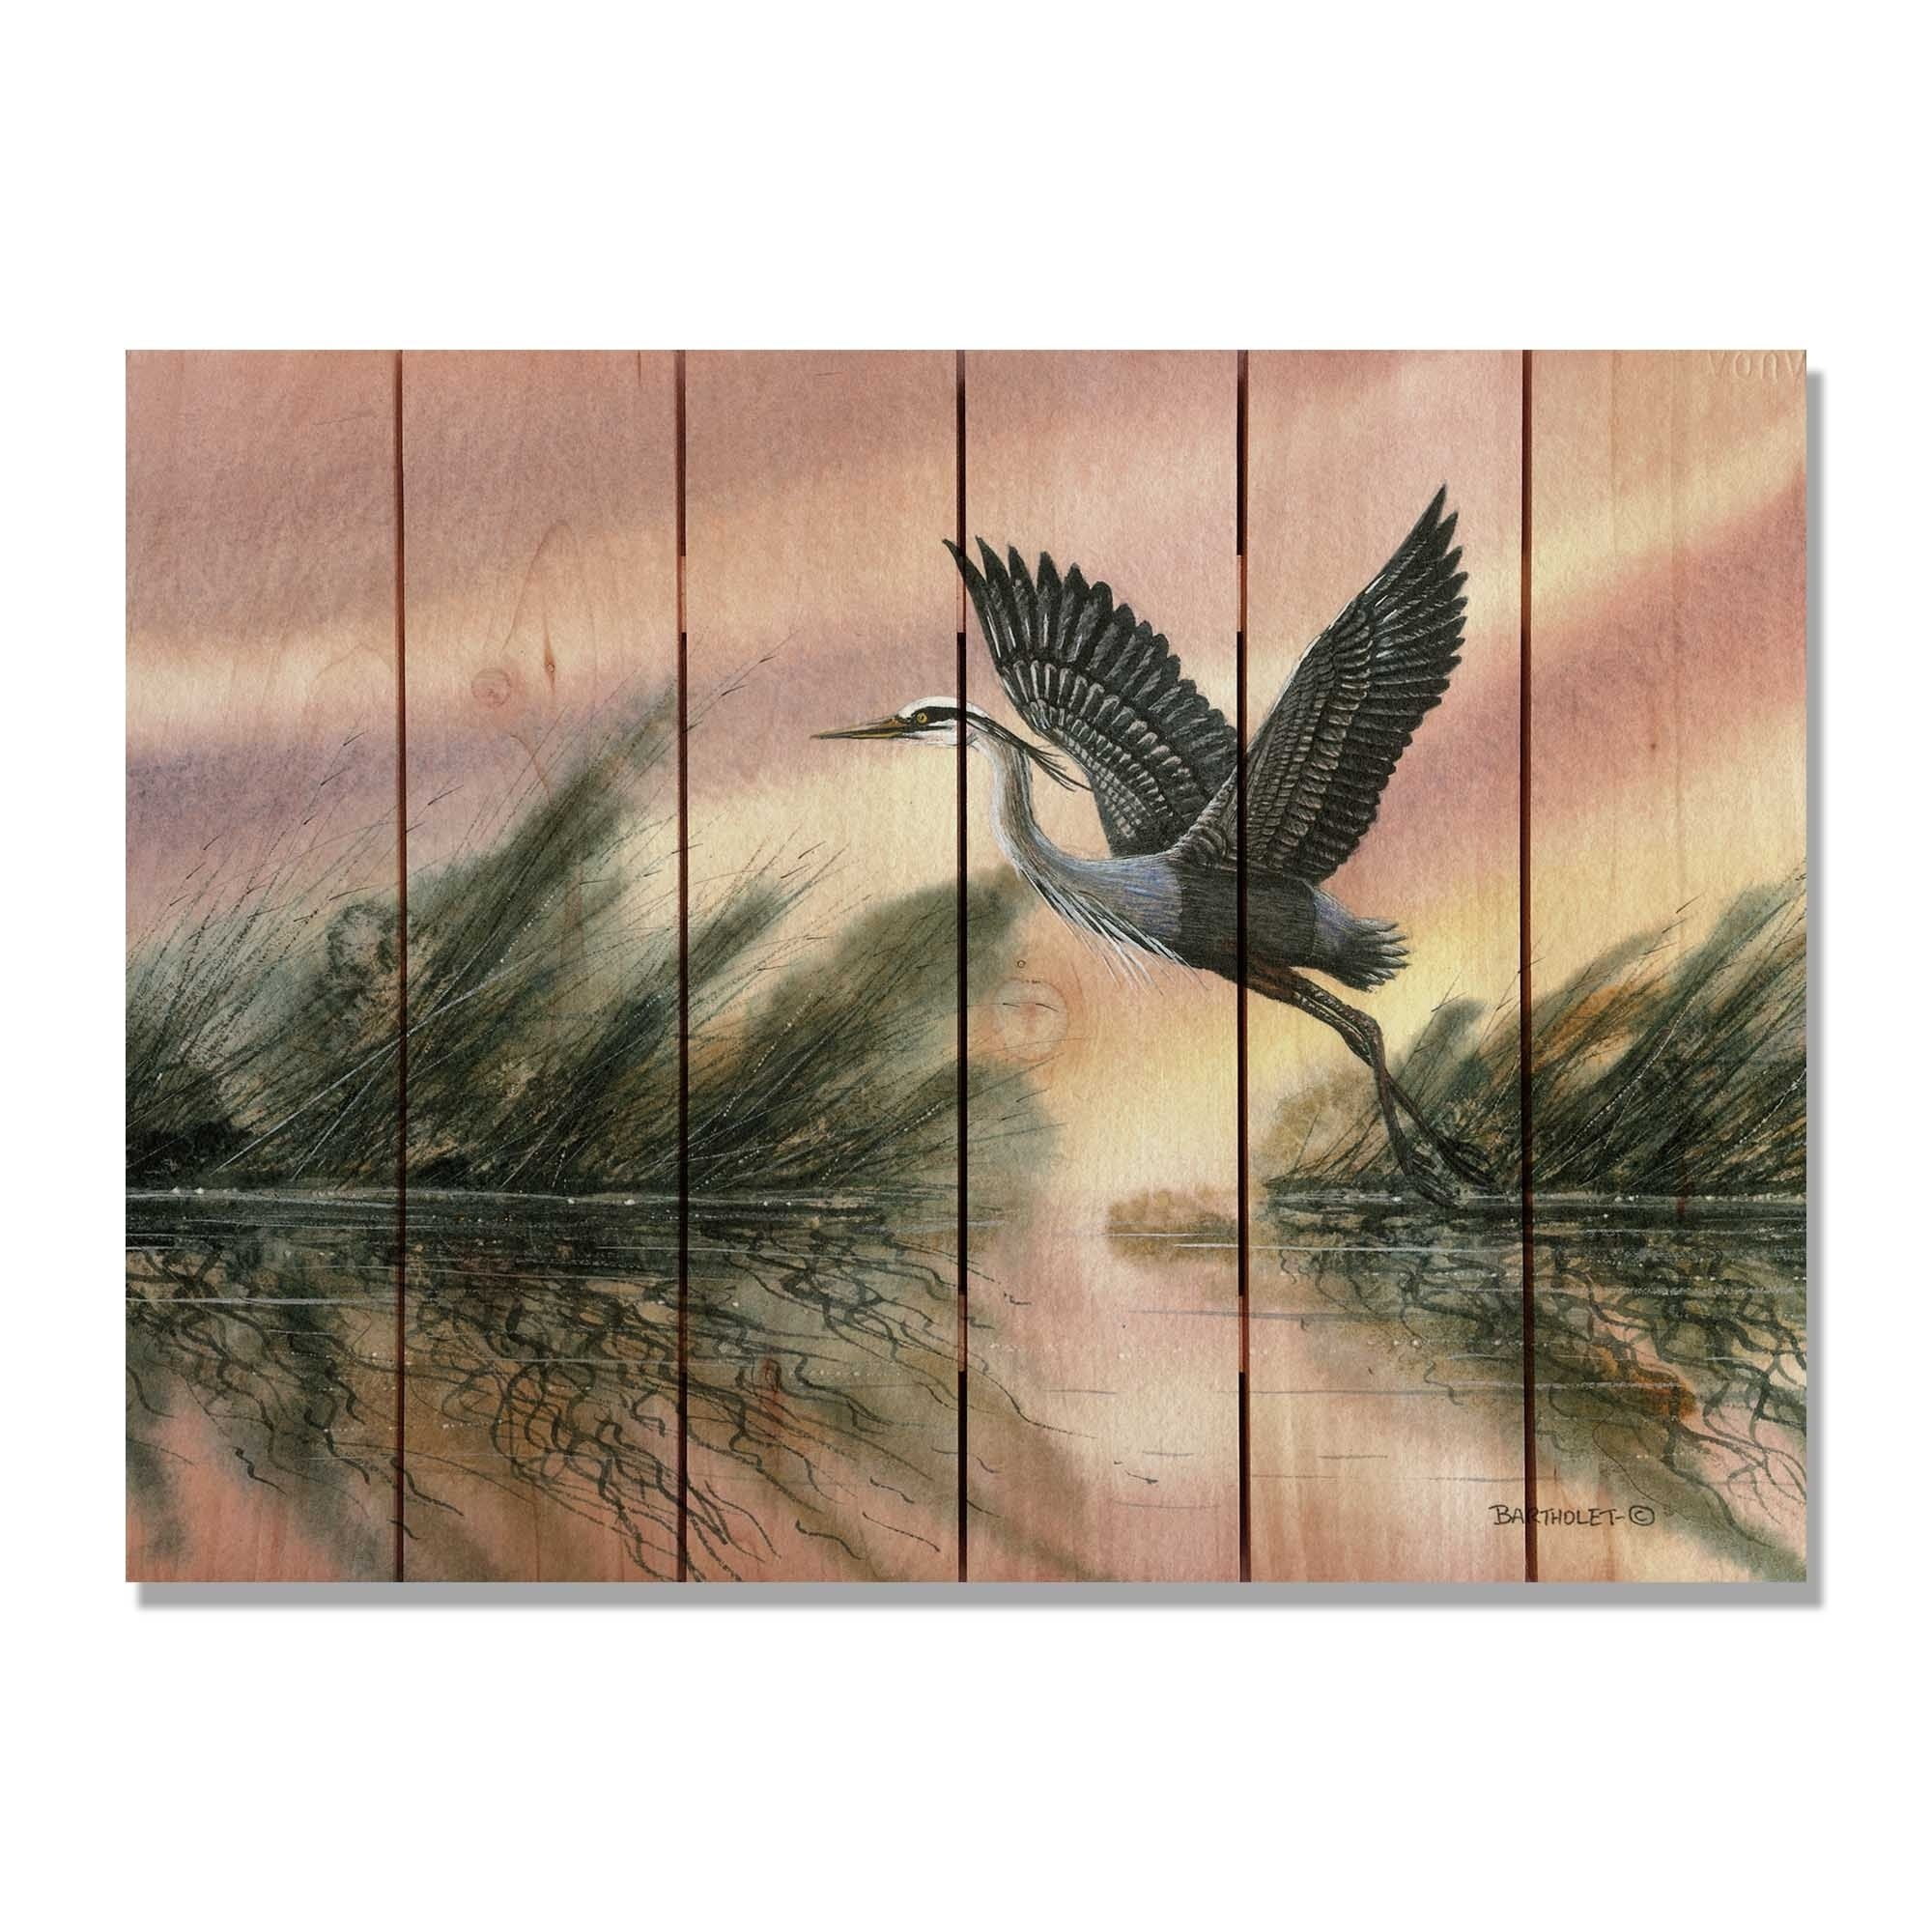 Day Dream Hq Dbcm3324 33 X 24 In. Bartholets Cool Of The Morning Inside & Outside Cedar Wall Art